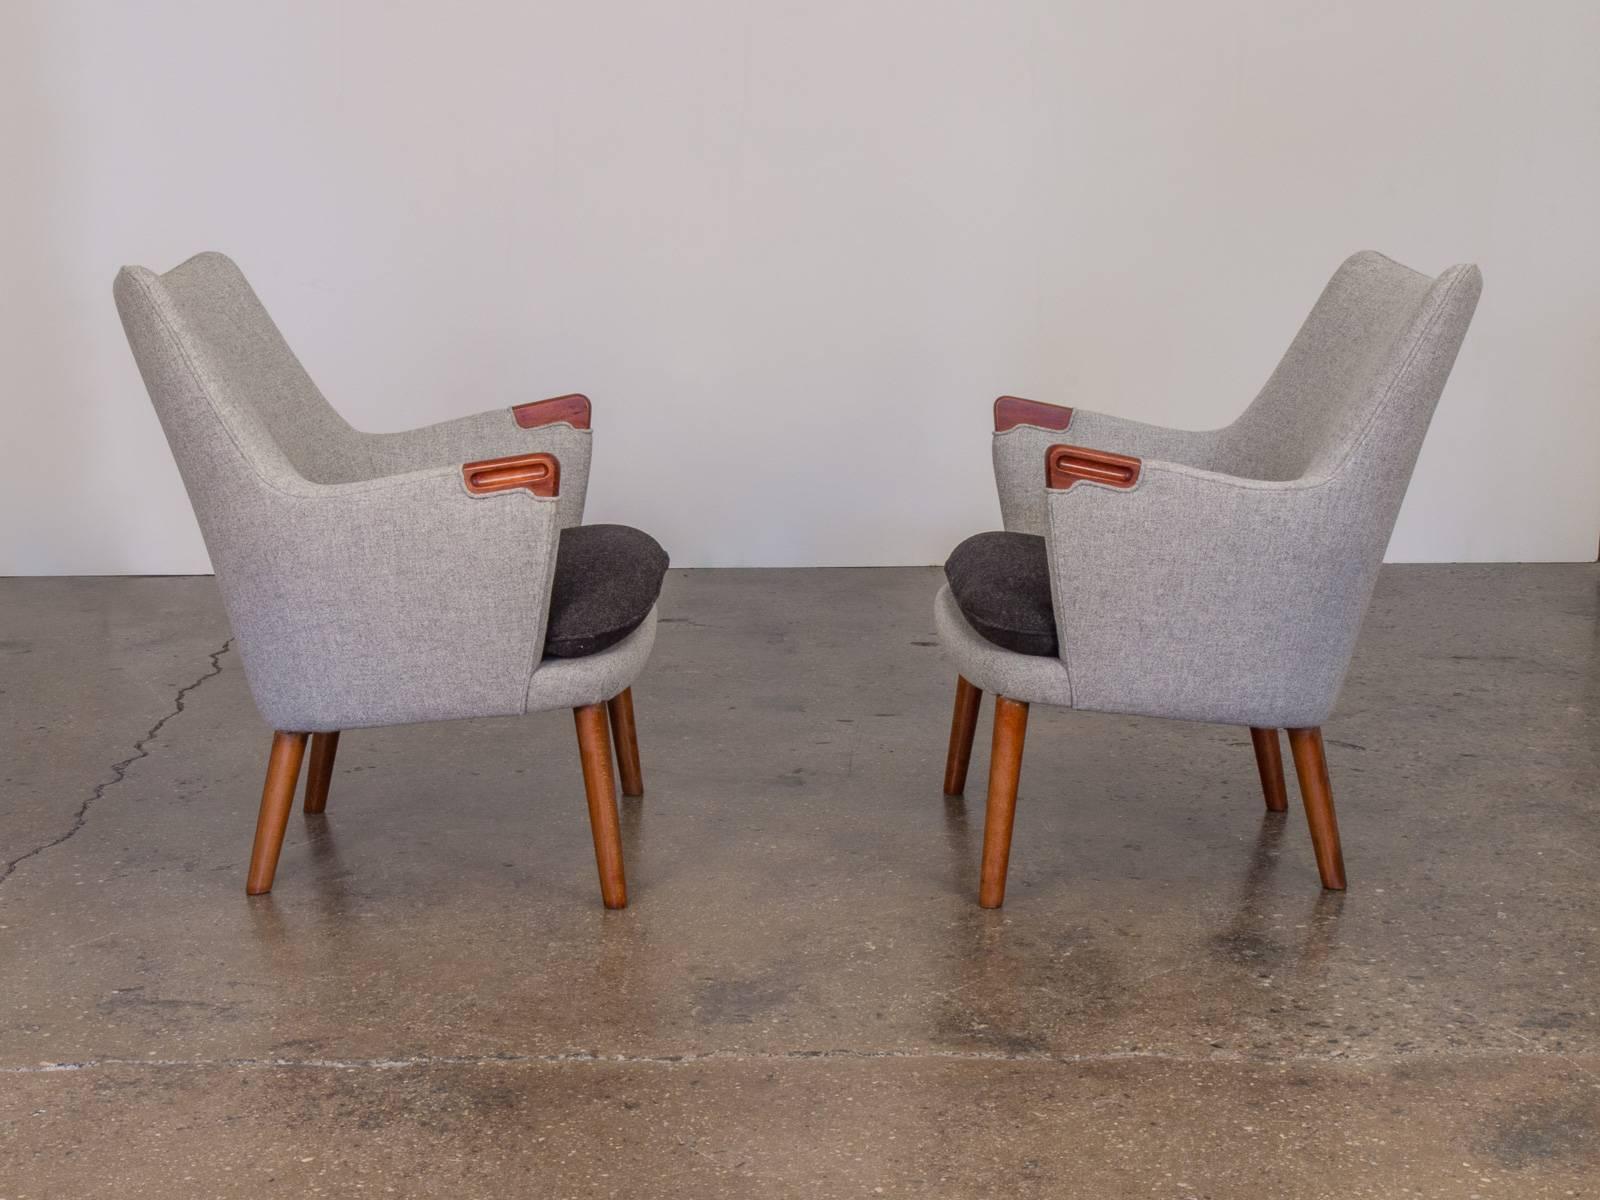 A scarce pair of Hans Wegner AP-20 chairs. Manufactured by AP Stolen, Denmark, circa 1954. Our chairs have been faithfully restored and upholstered in Maharam Tonica by Kvadrat. Chairs are stunning in every way! A sample swatch of material is